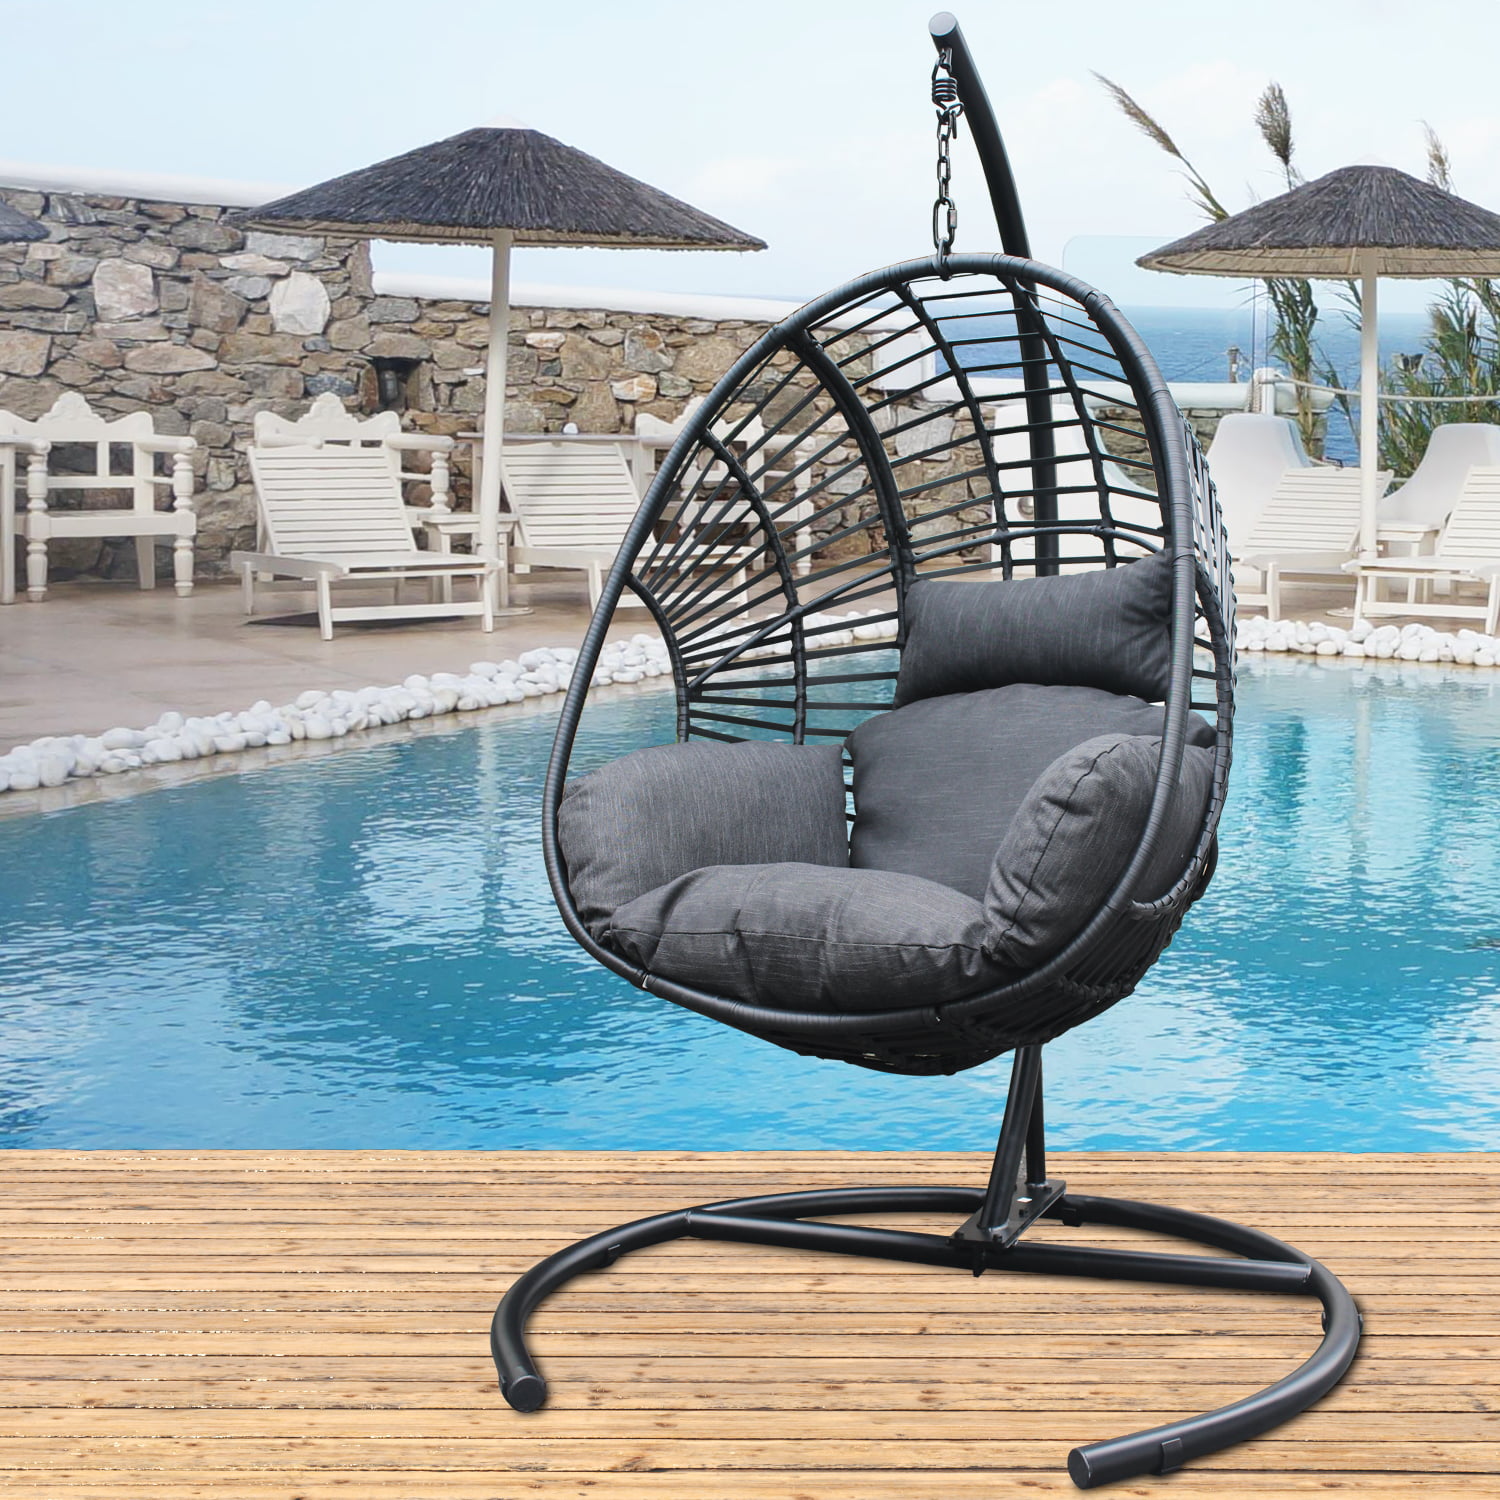 Details about   Hanging Hammock Swing Chair Egg Wicker Stand Seat Cover Patio Garden Outdoor New 